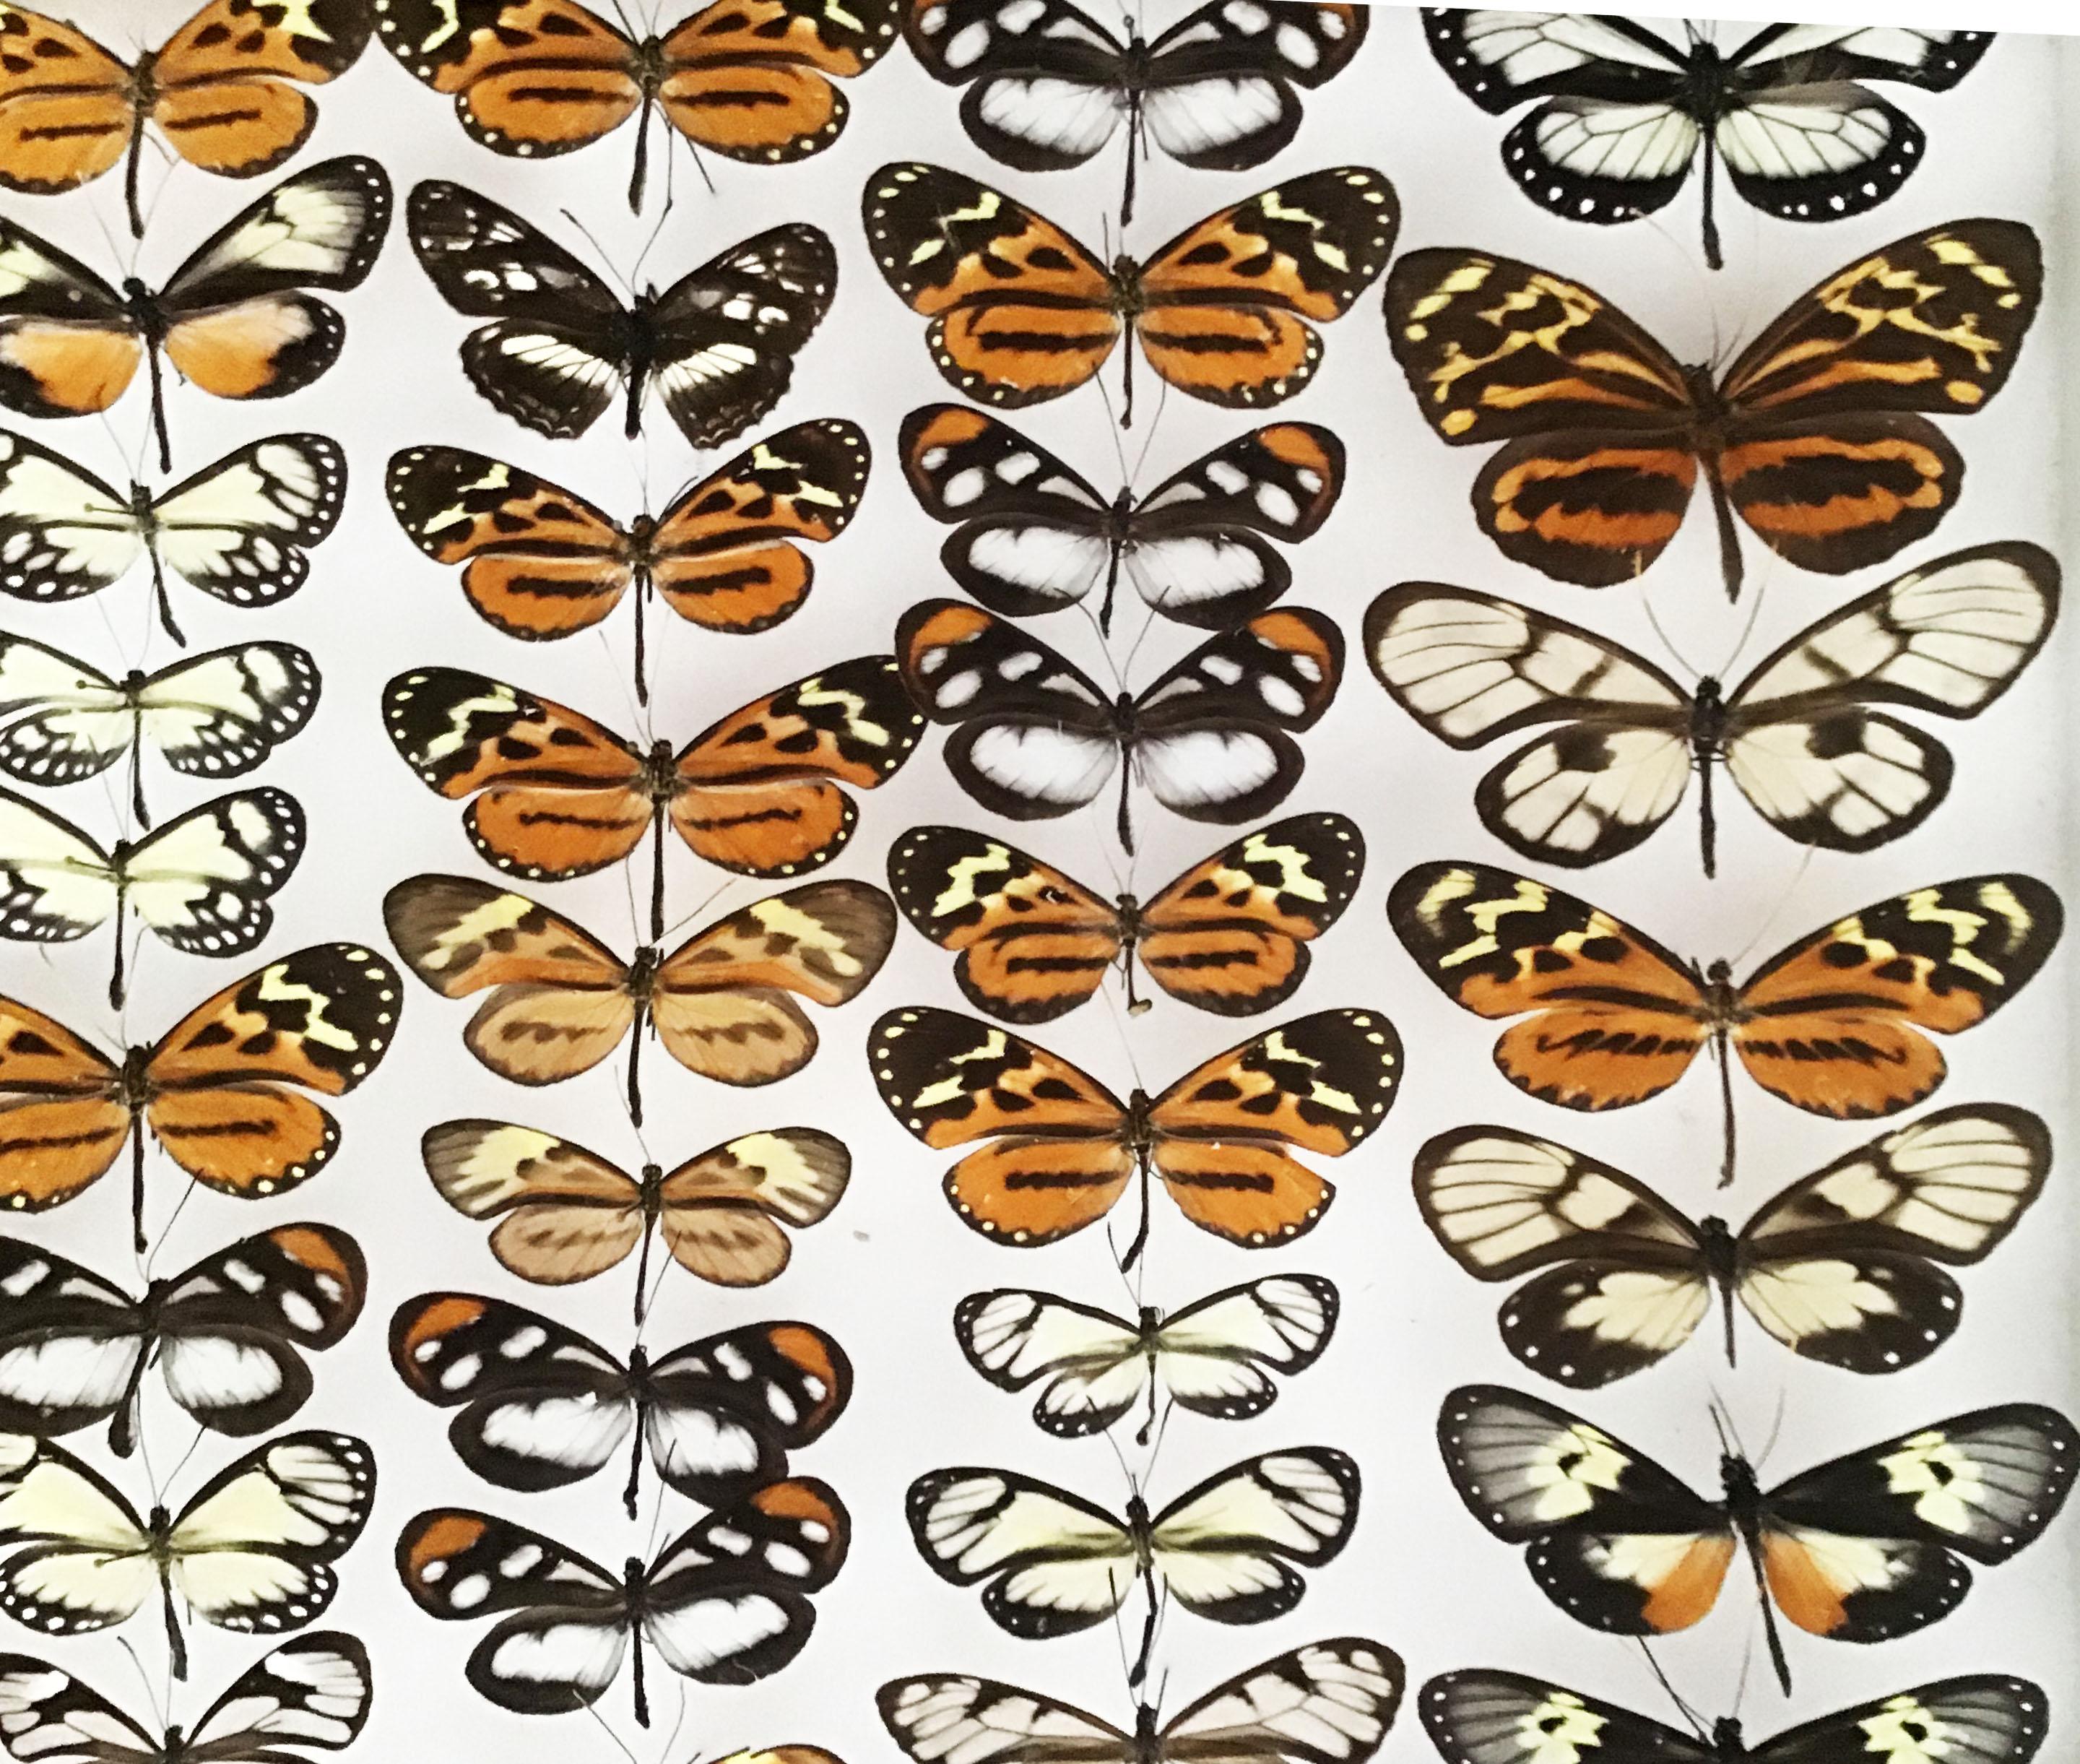 Wood Collection of Tropical Butterflies in Vintage Cases